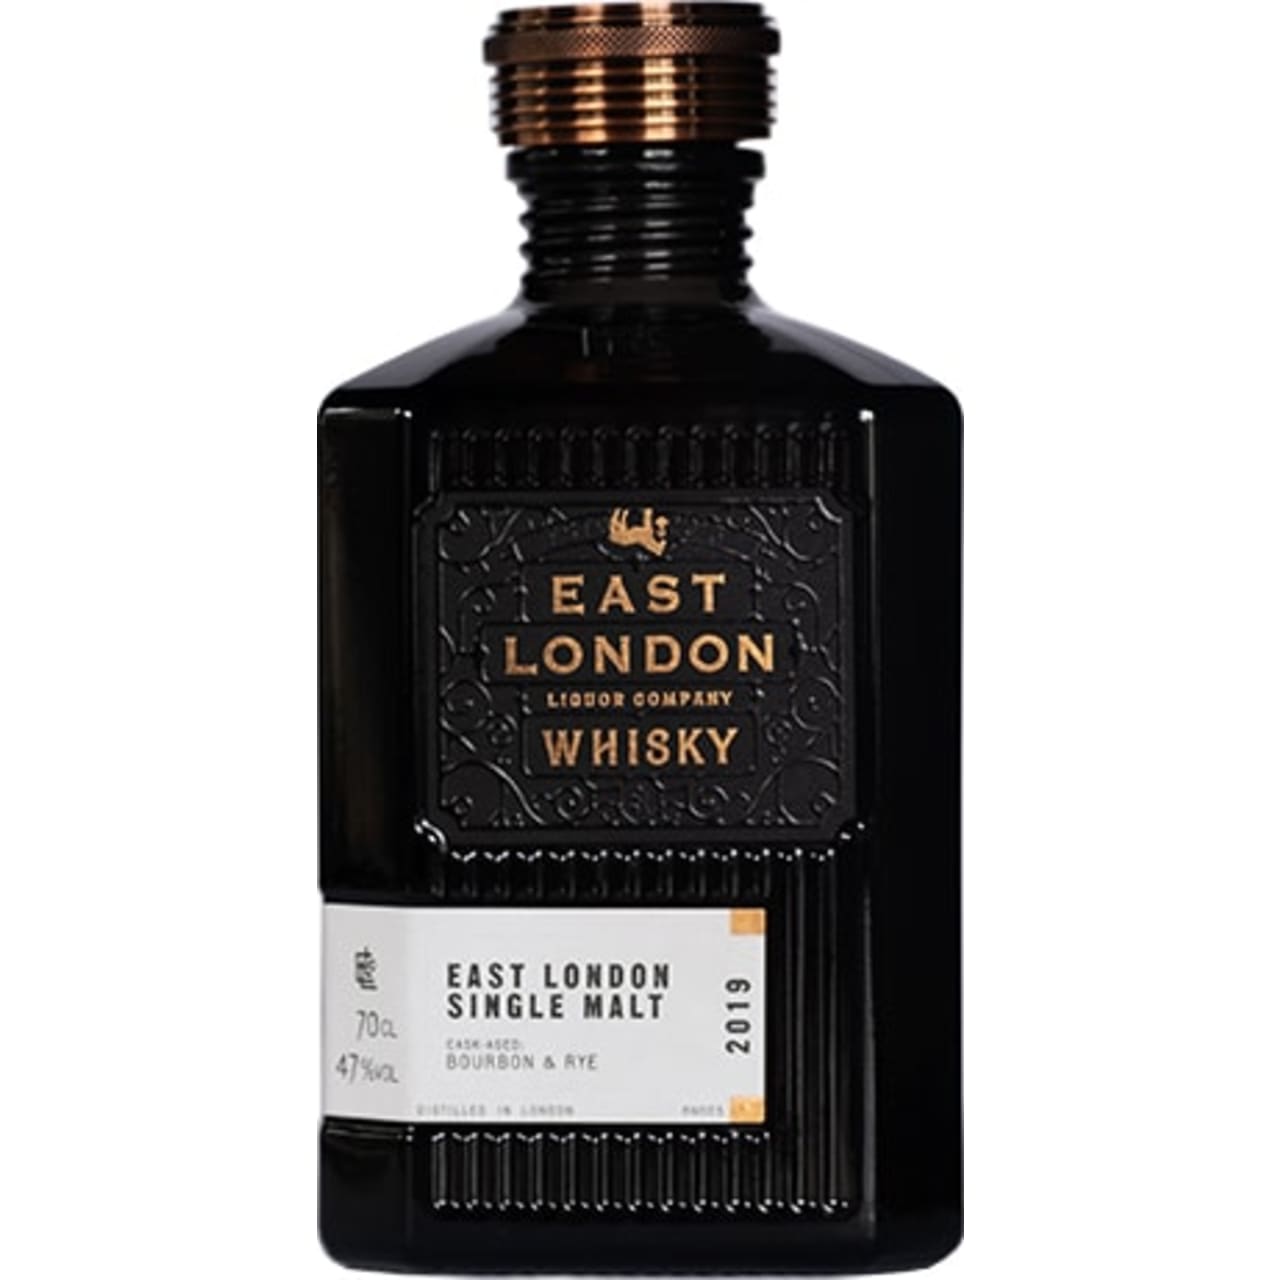 This Single Malt from the East London Liquor Company is aged in a mixture of Sonoma rye casks and ex bourbon casks. It is double distilled at their East London distillery.